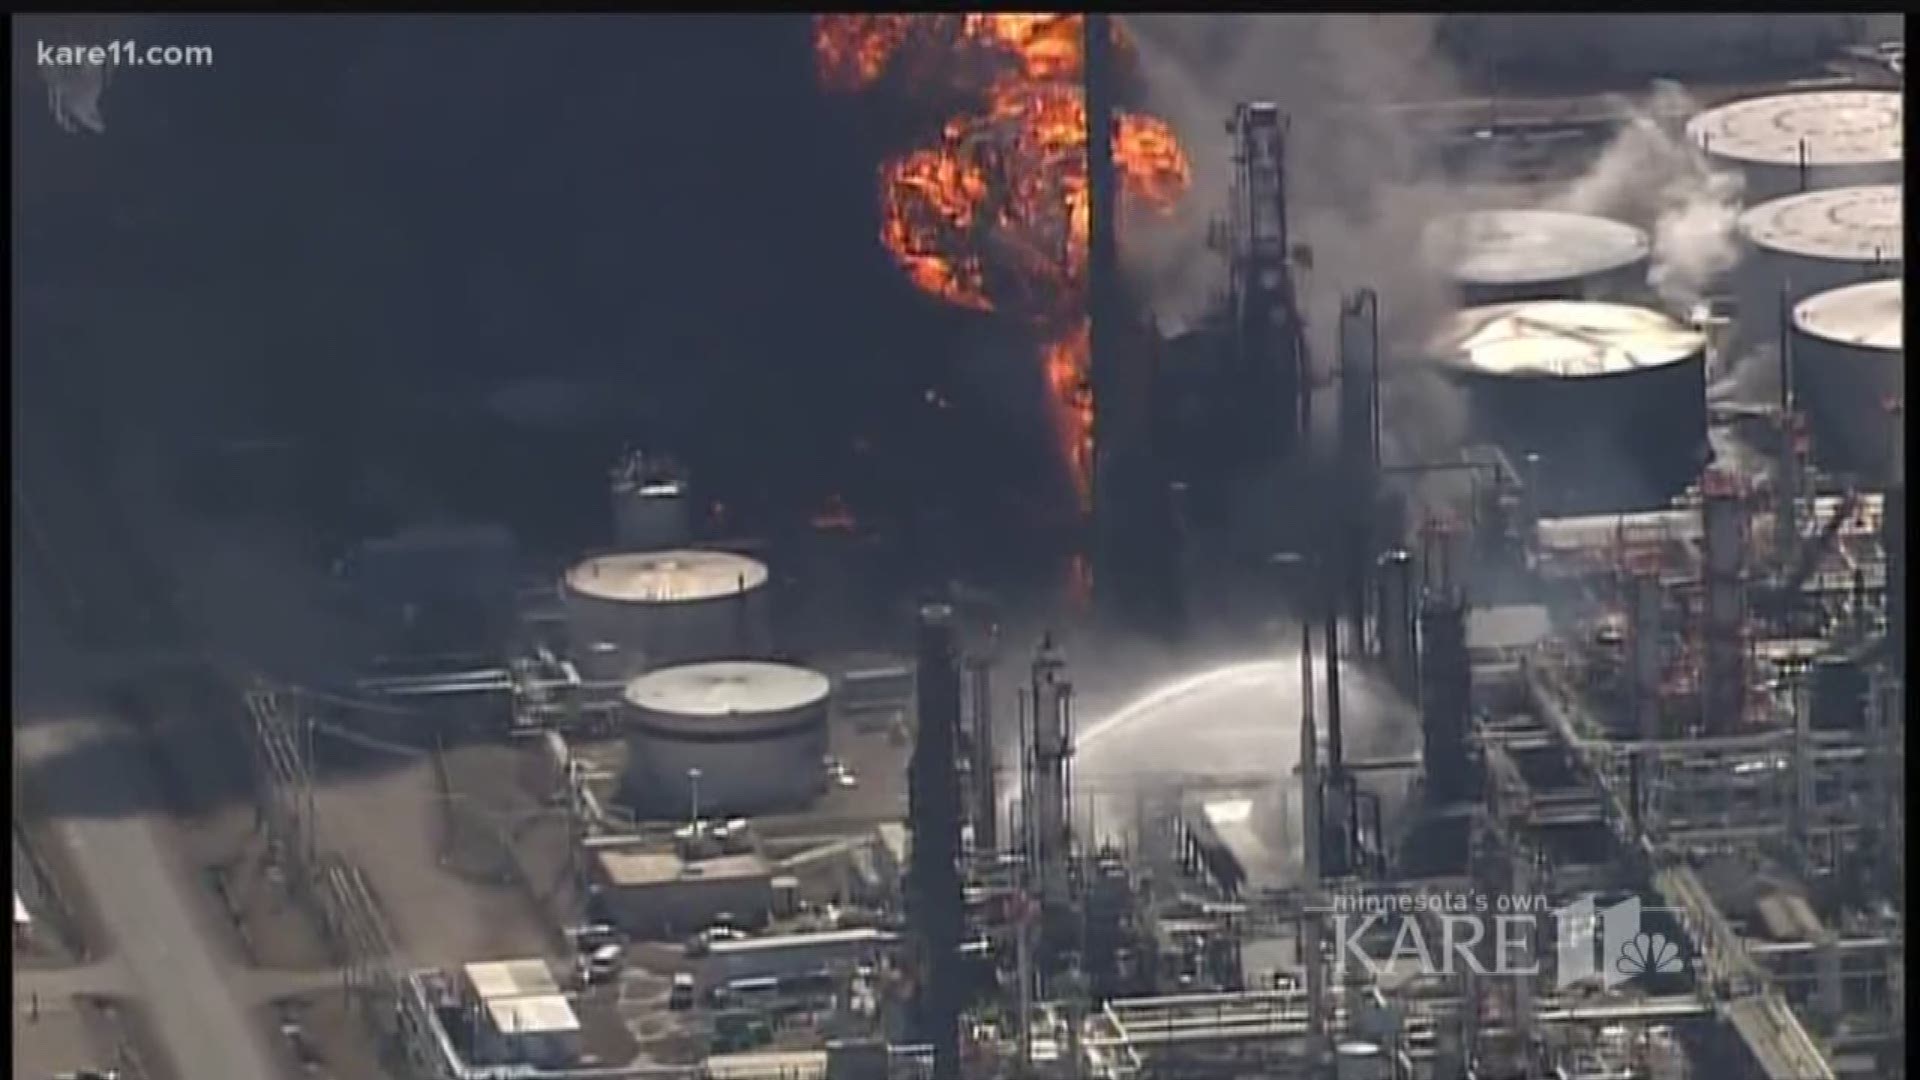 Oil refinery explosion in Superior, Wisconsin 10 p.m. 4-26-18